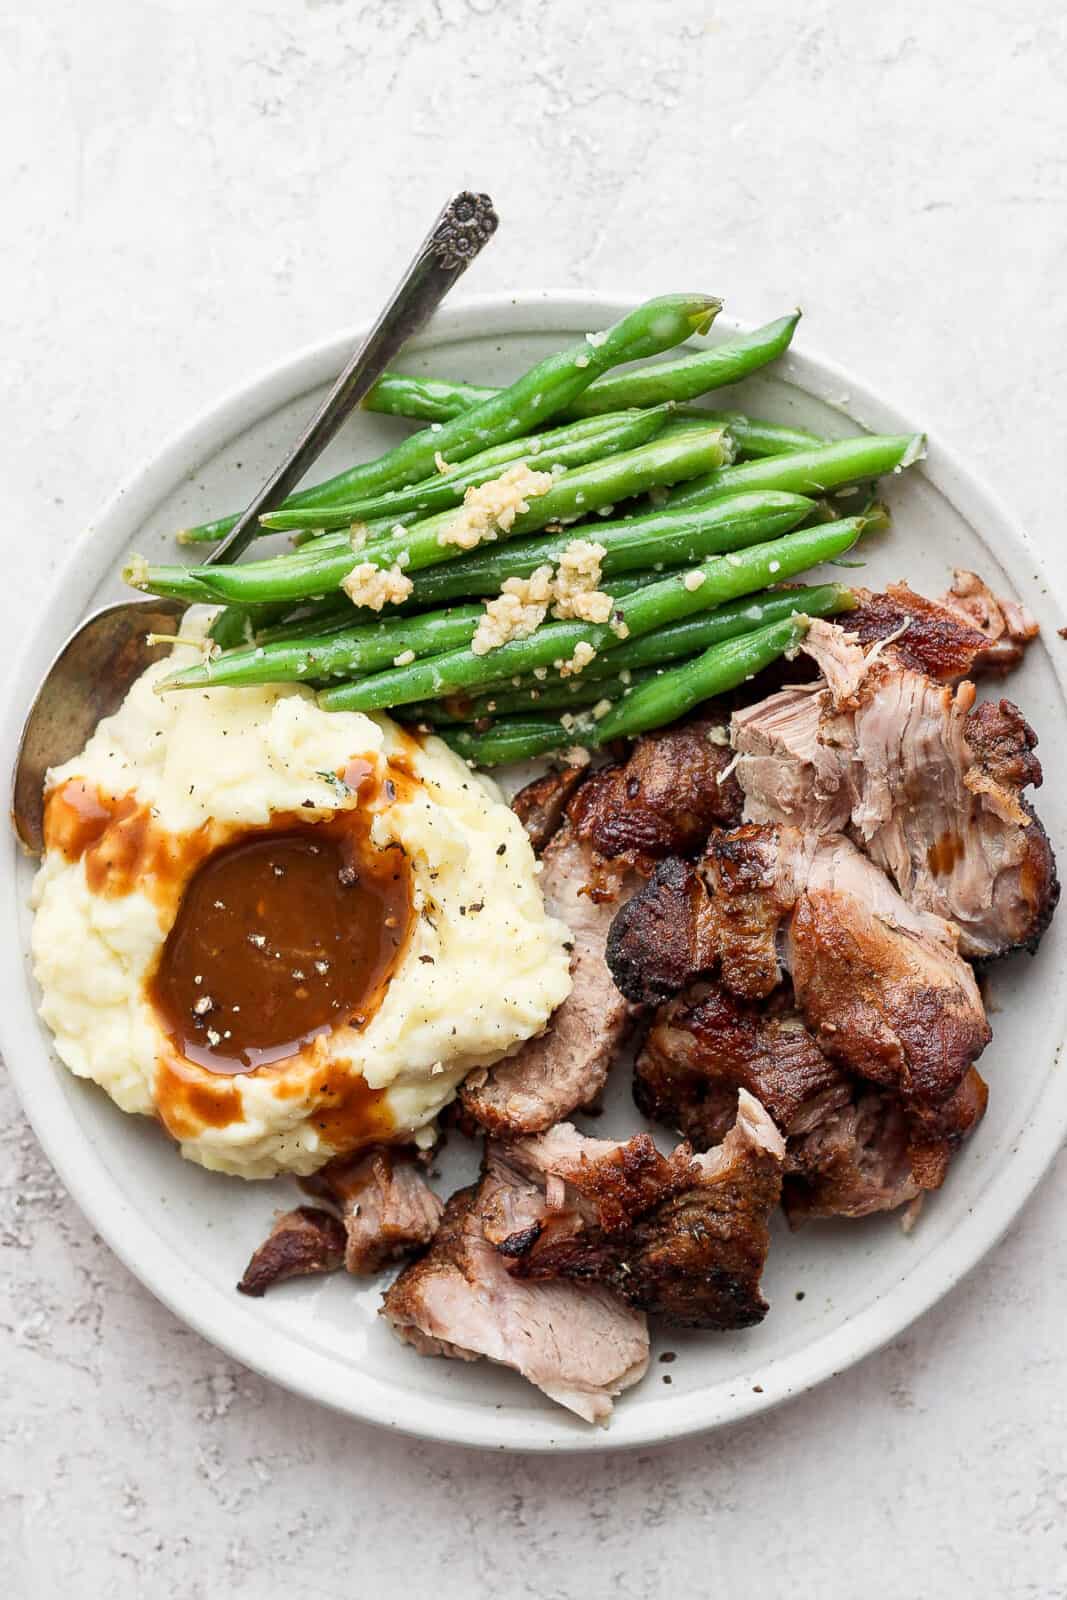 A plate of mashed potatoes with gravy, green beans, and pork roast.